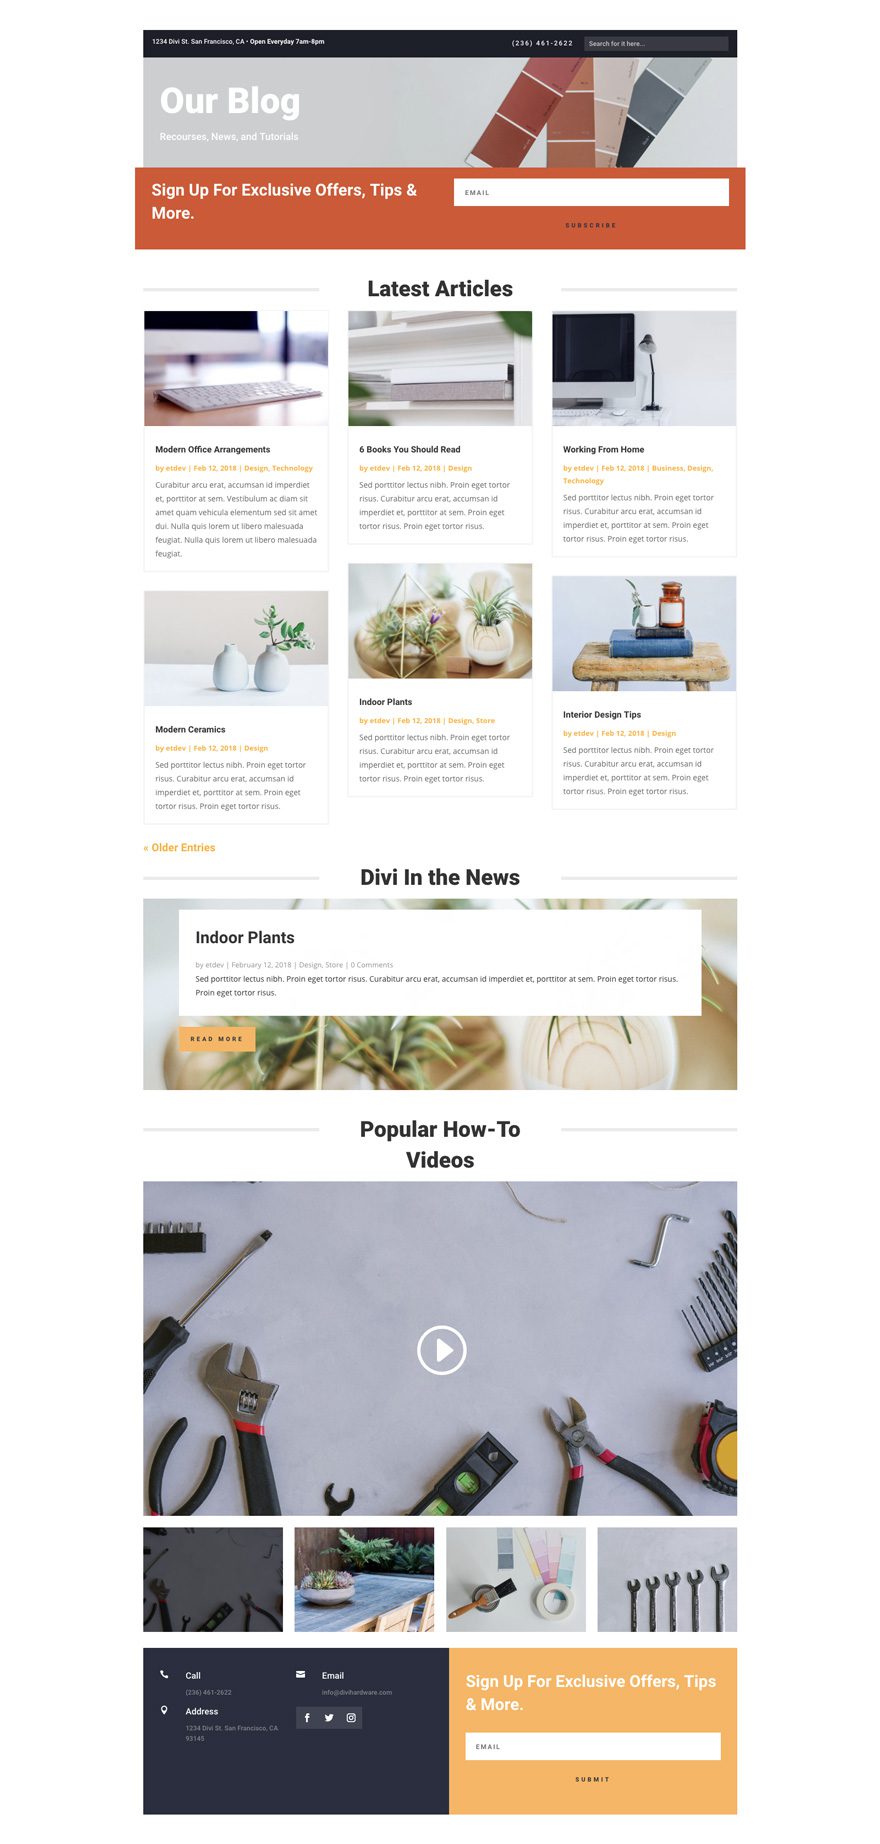 divi hardware store layout pack